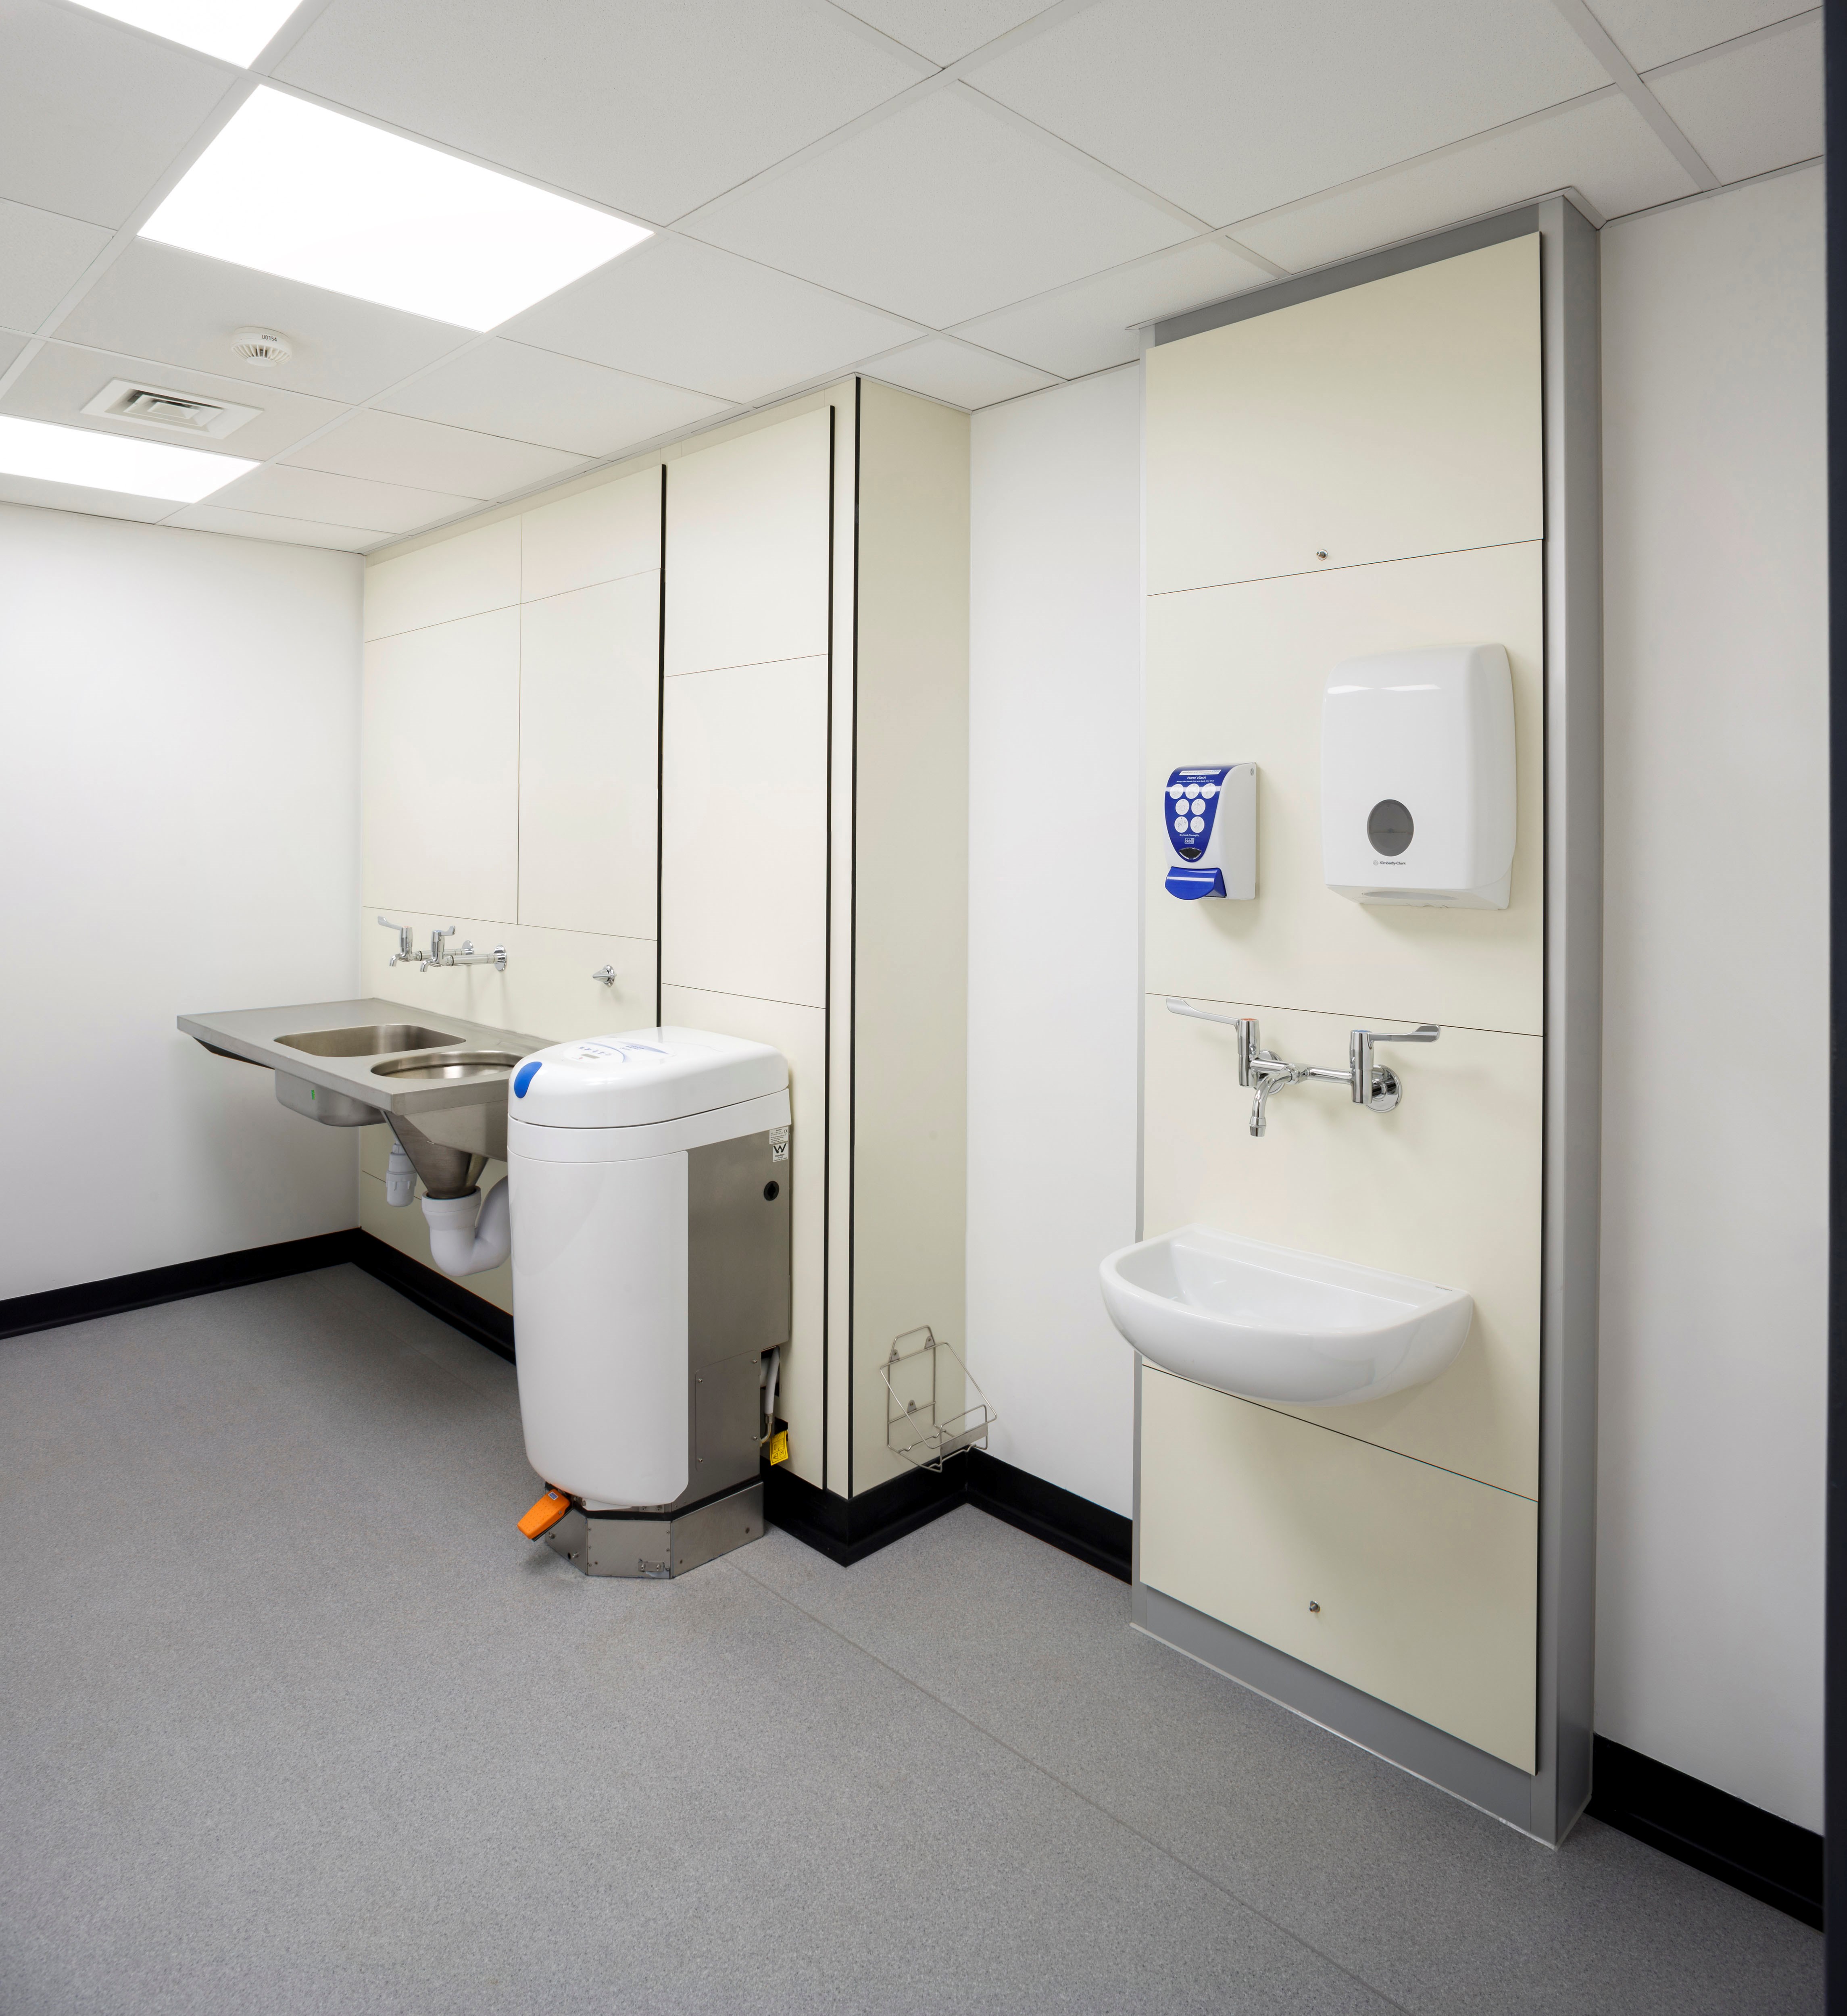 venesta-washrooms-vepps-healthcare-ips-panelling-wall-boxed-out-unit-pre-plumbed-queen-elizabeth-hospital-hr